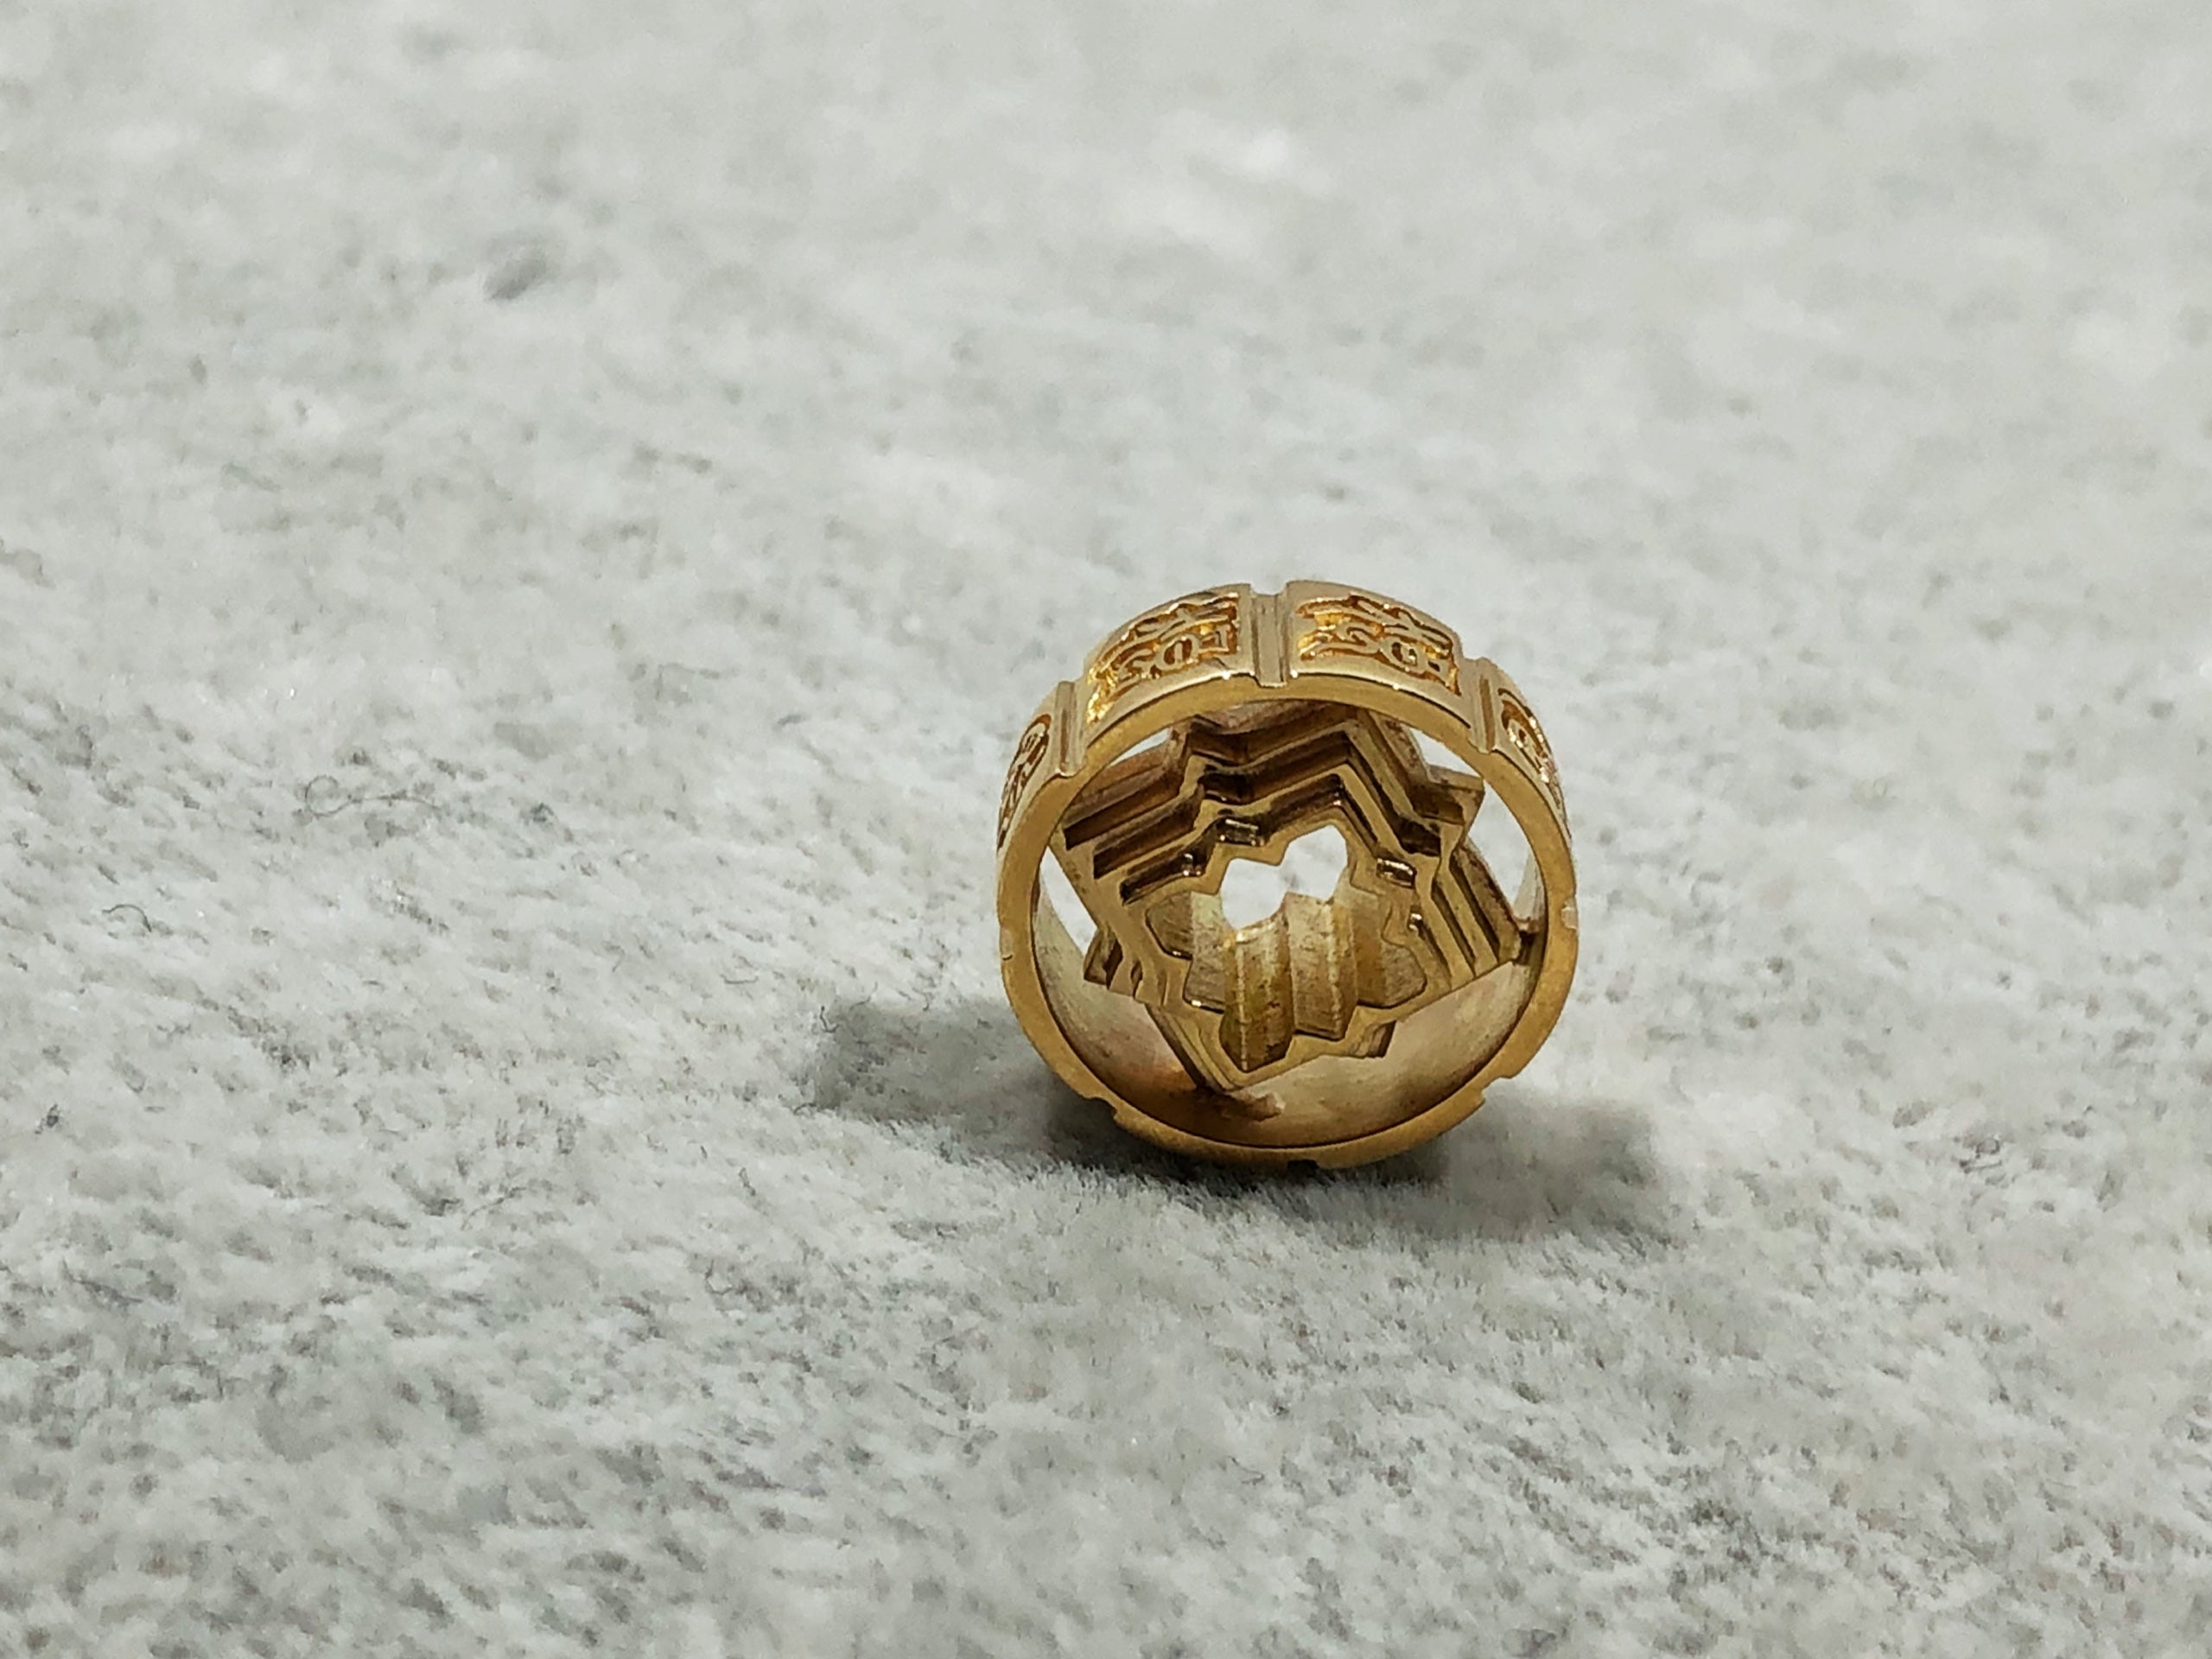 Cheers to great fortune in 2021 God of Roads Octagram Prayer Bead, 18K gold - 2021新年吉祥 路神八方平安珠 18K金款